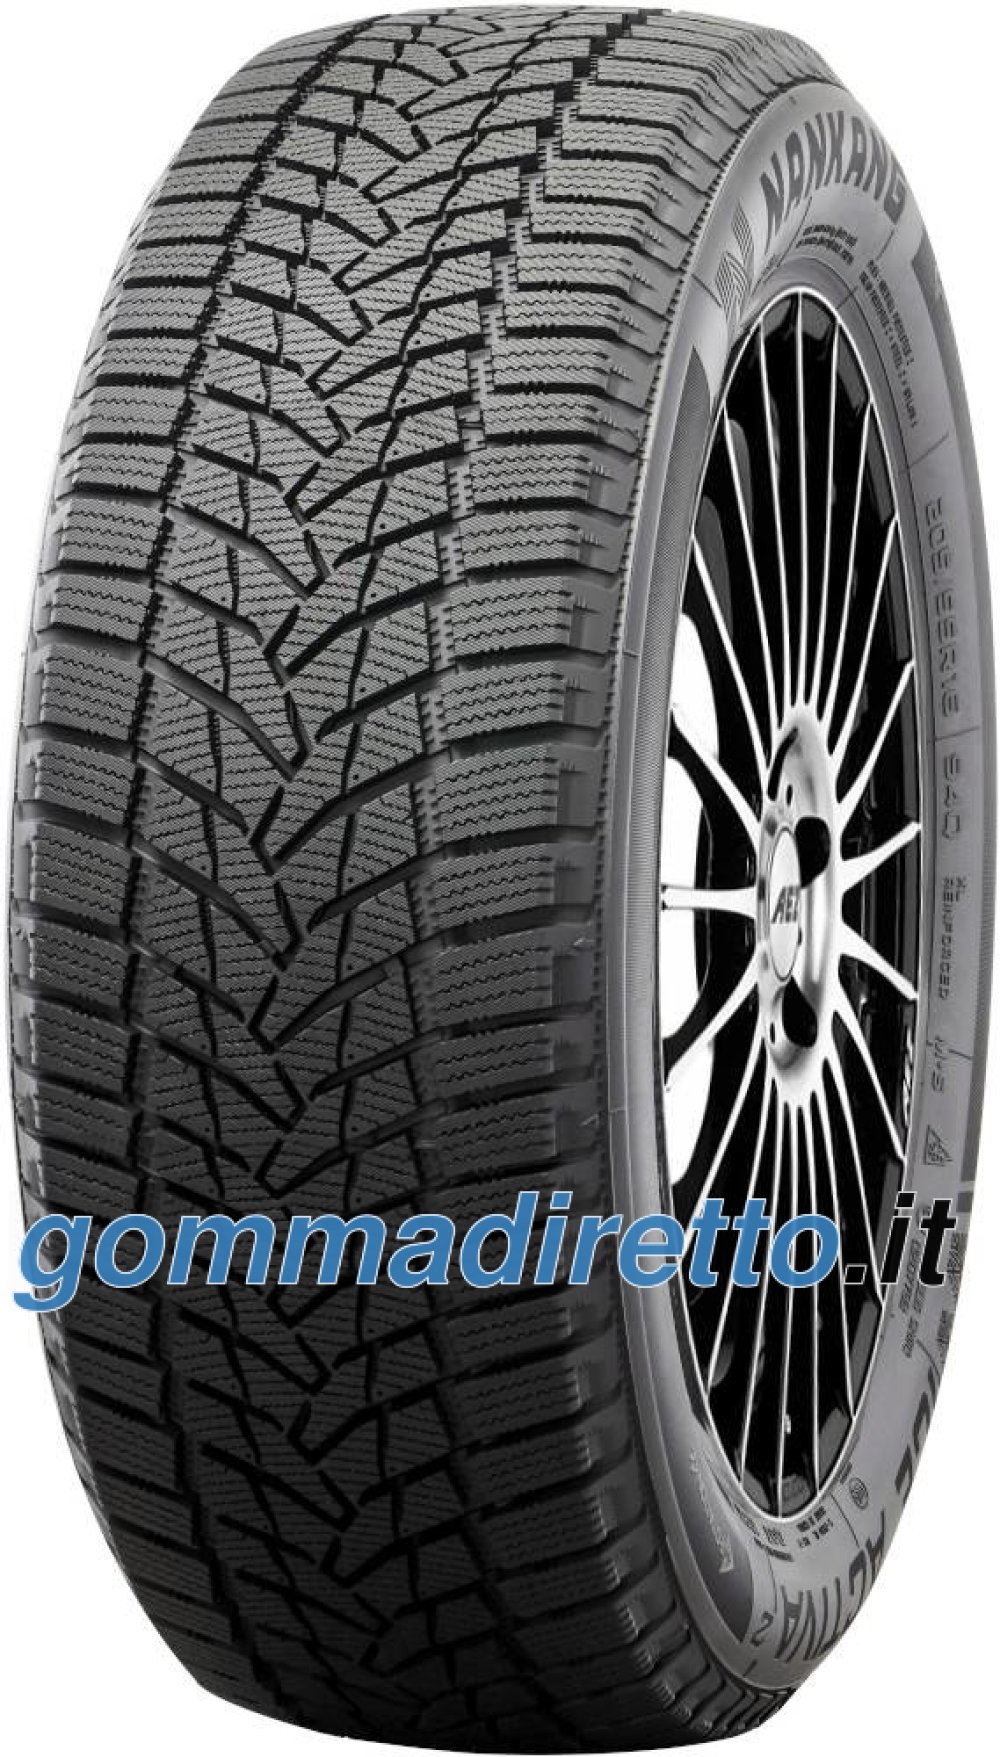 Image of Nankang ICE ACTIVA 2 ( 215/55 R17 98T XL, Nordic compound )